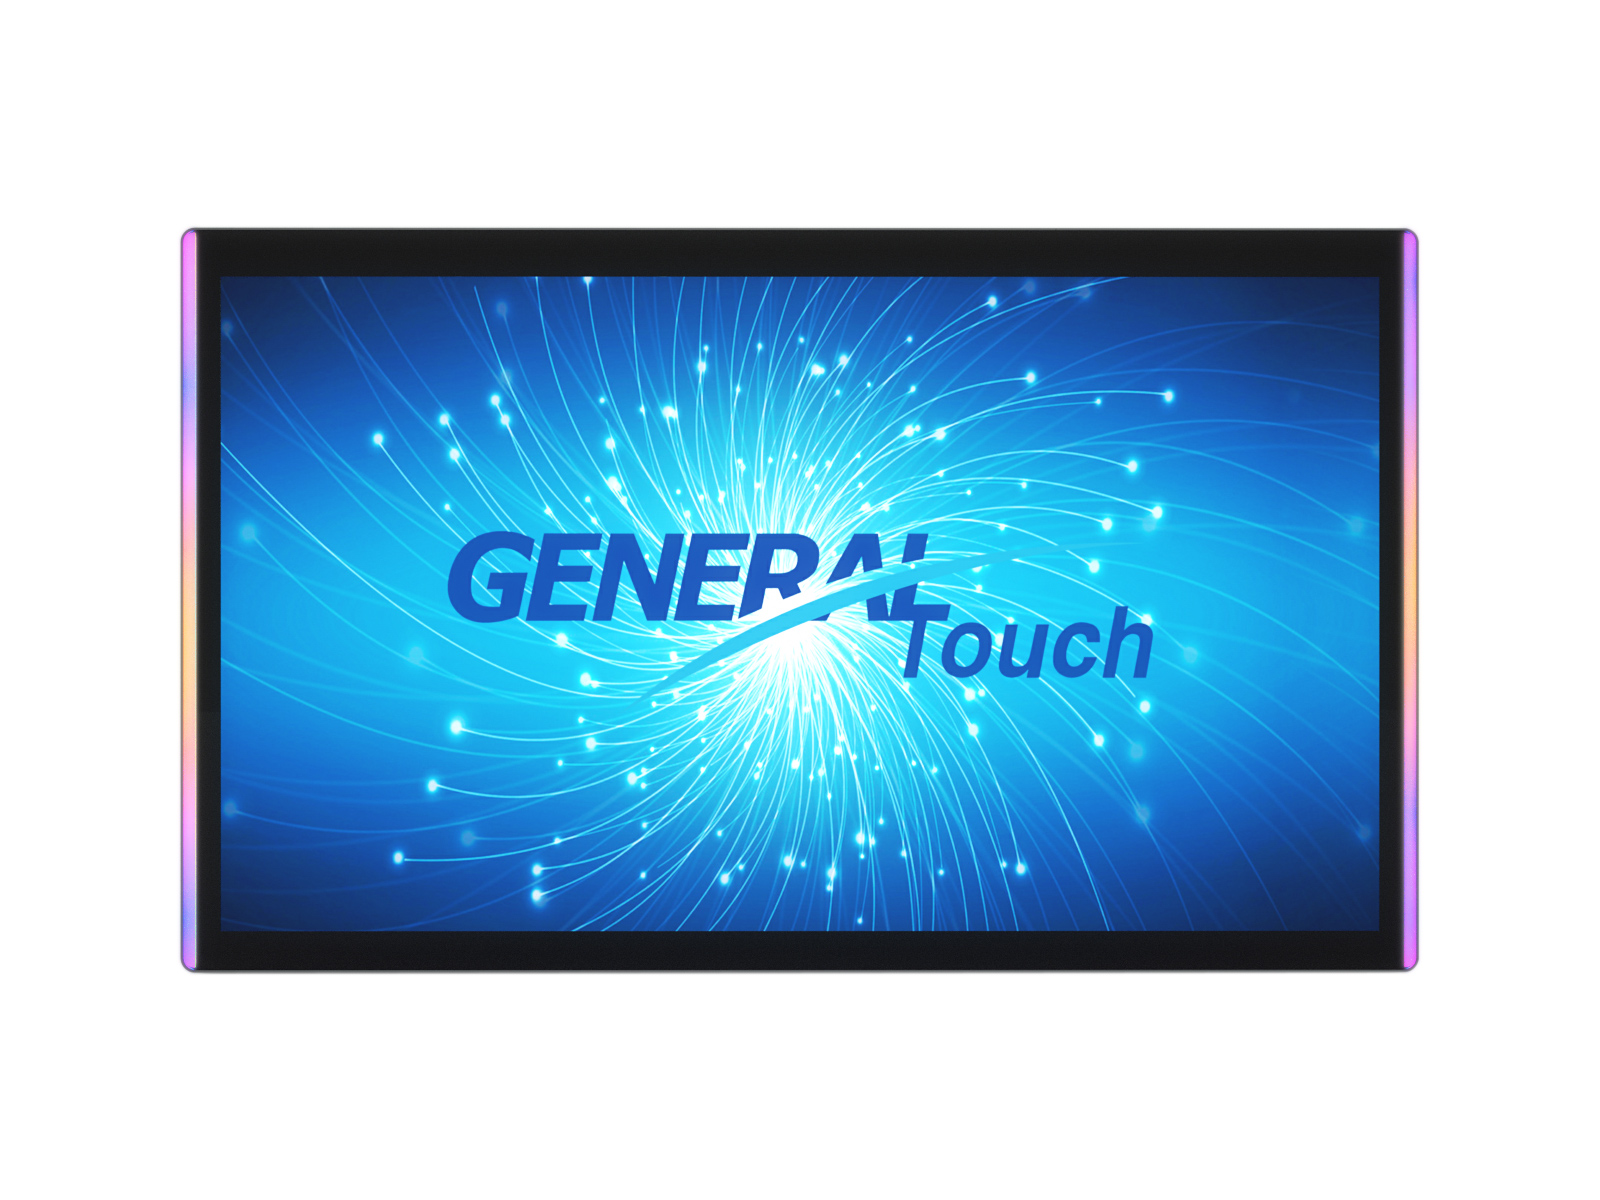 OML275 27″ 2-Side LED Non-touch Featured Image